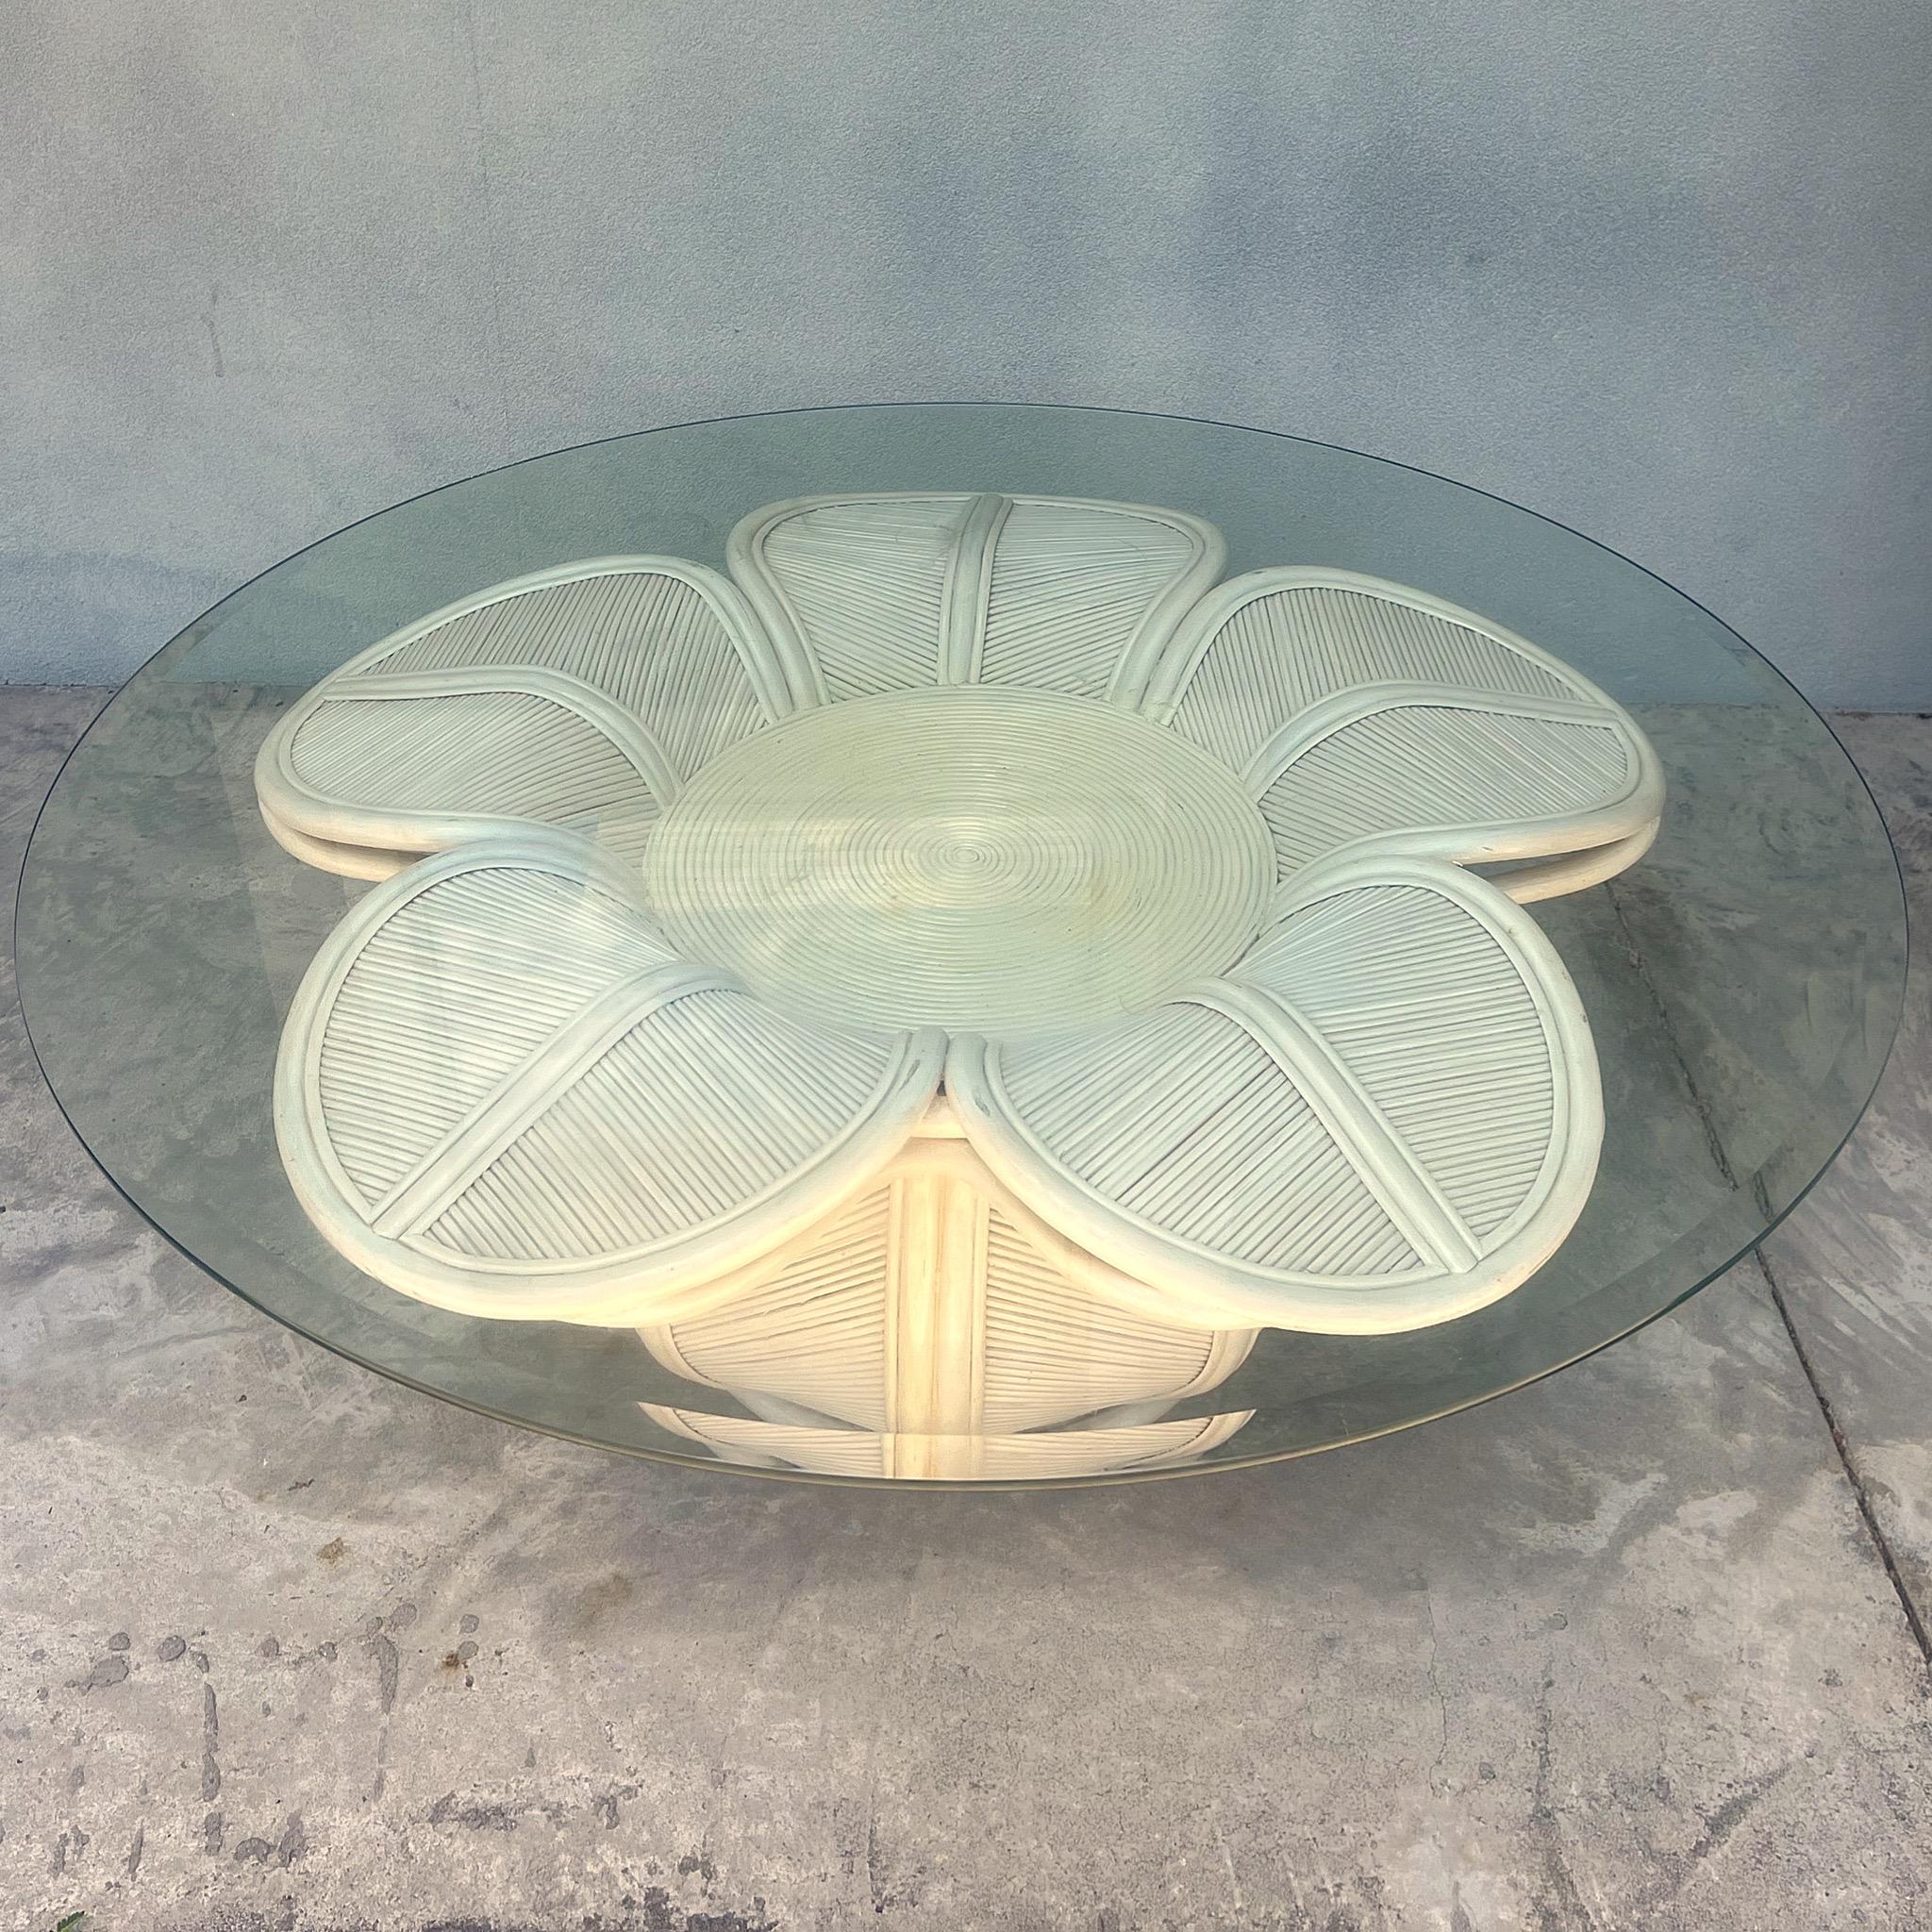 Mid Century Pencil Reed Gabriella Crespi Style Flower Mid Century Glass Top Cocktail Table Available and Ready to Ship!// Make a statement with this fabulous Pencil Reed floral side or cocktail table with a glass top. This piece is made of split